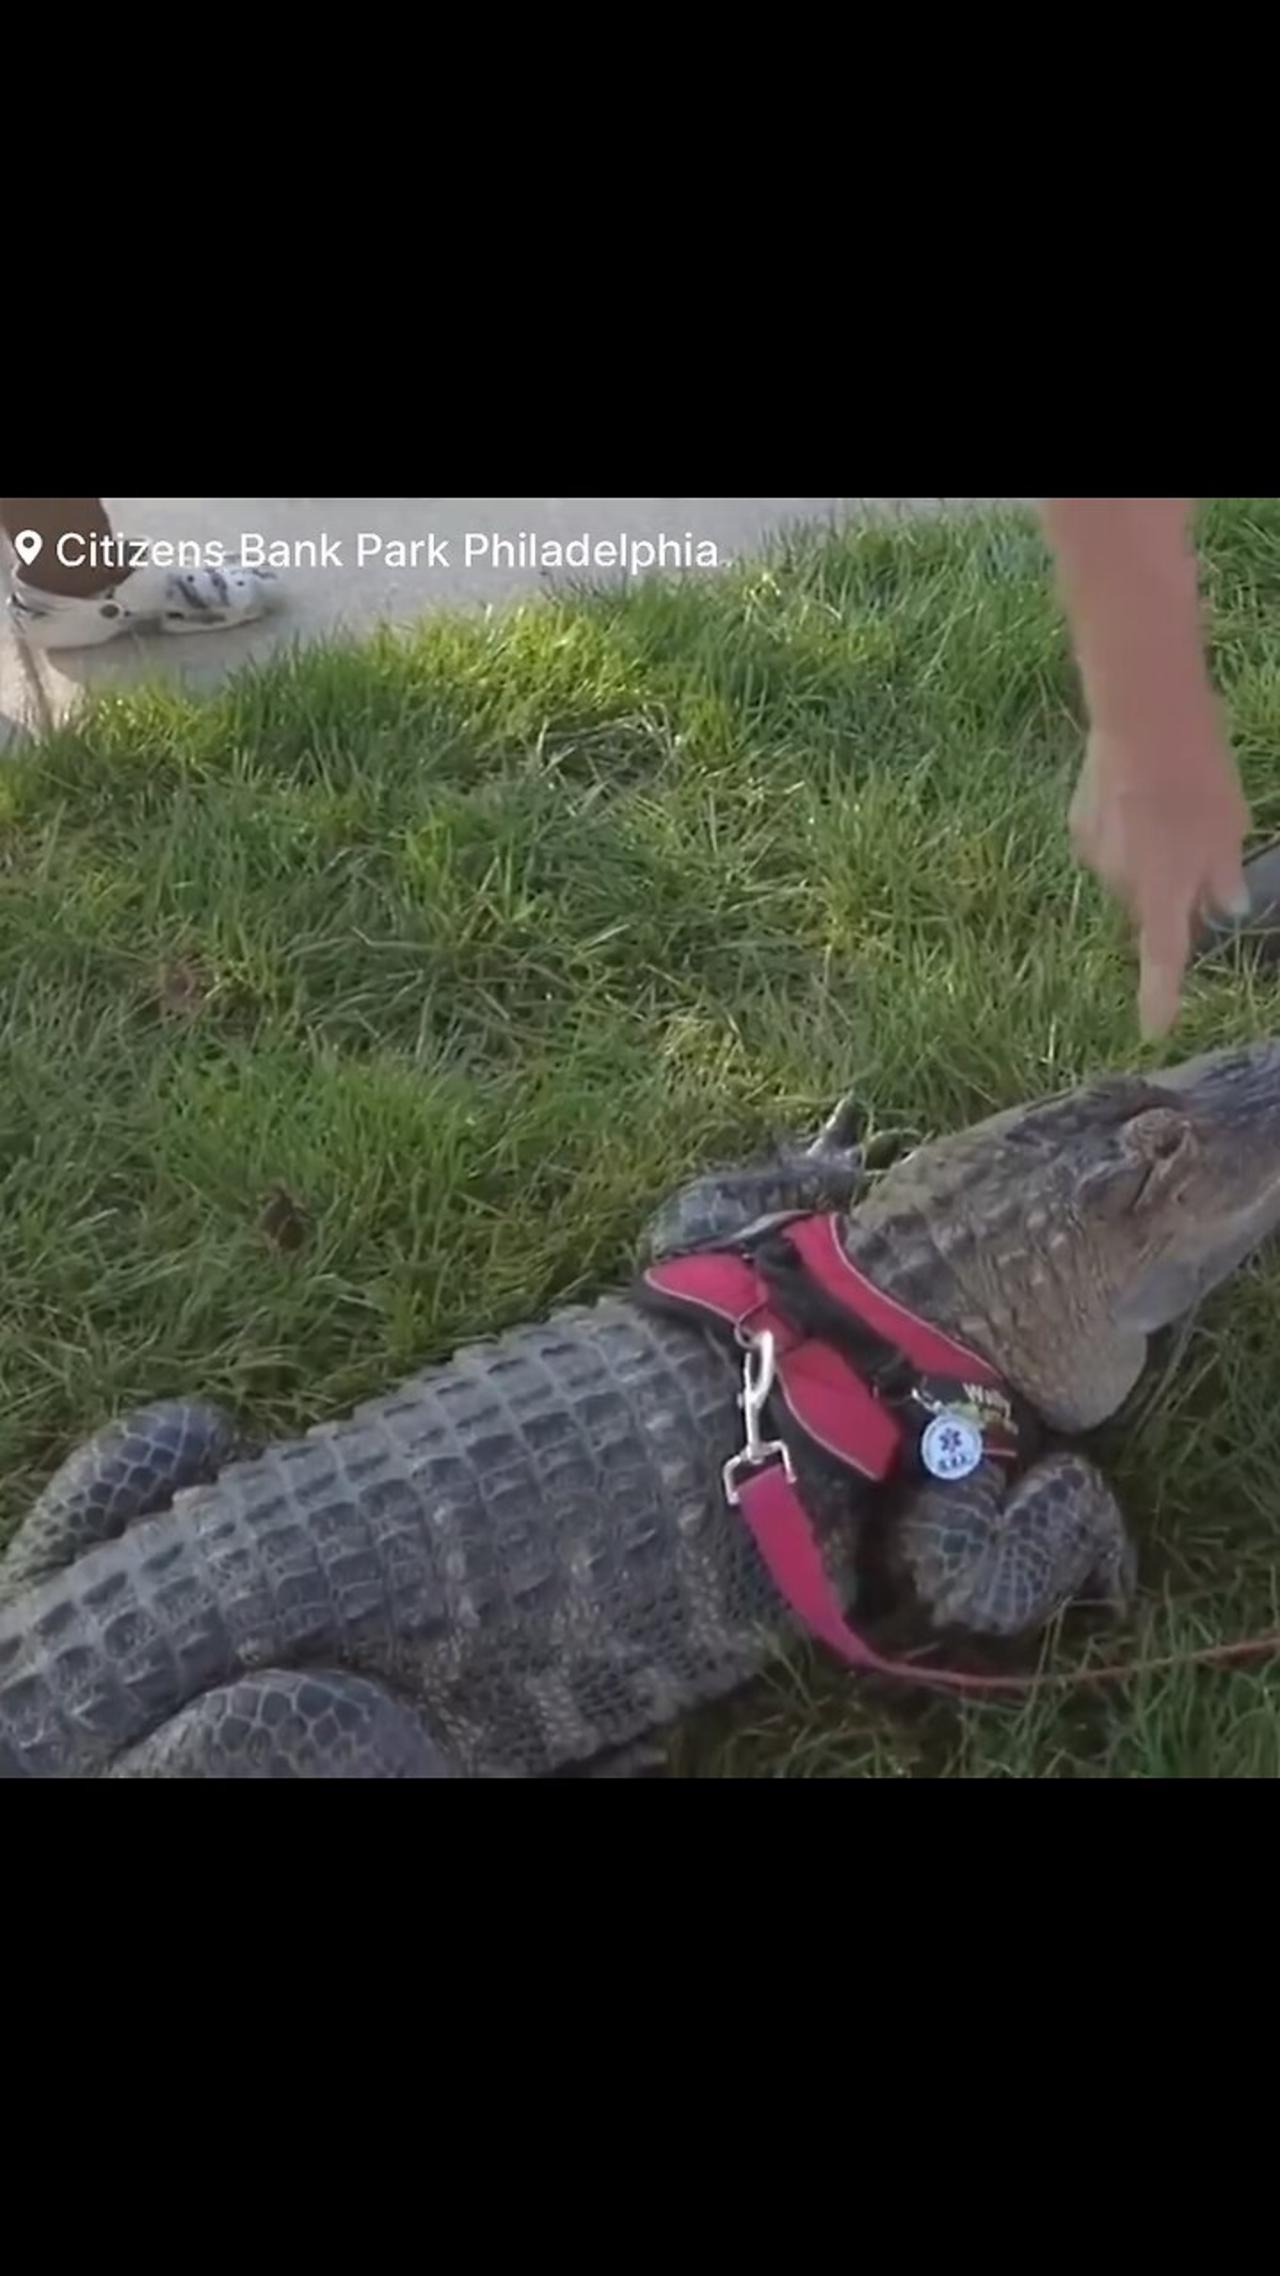 Phillies baseball fan is barred from coming into the game, because of bringing an alligator with him